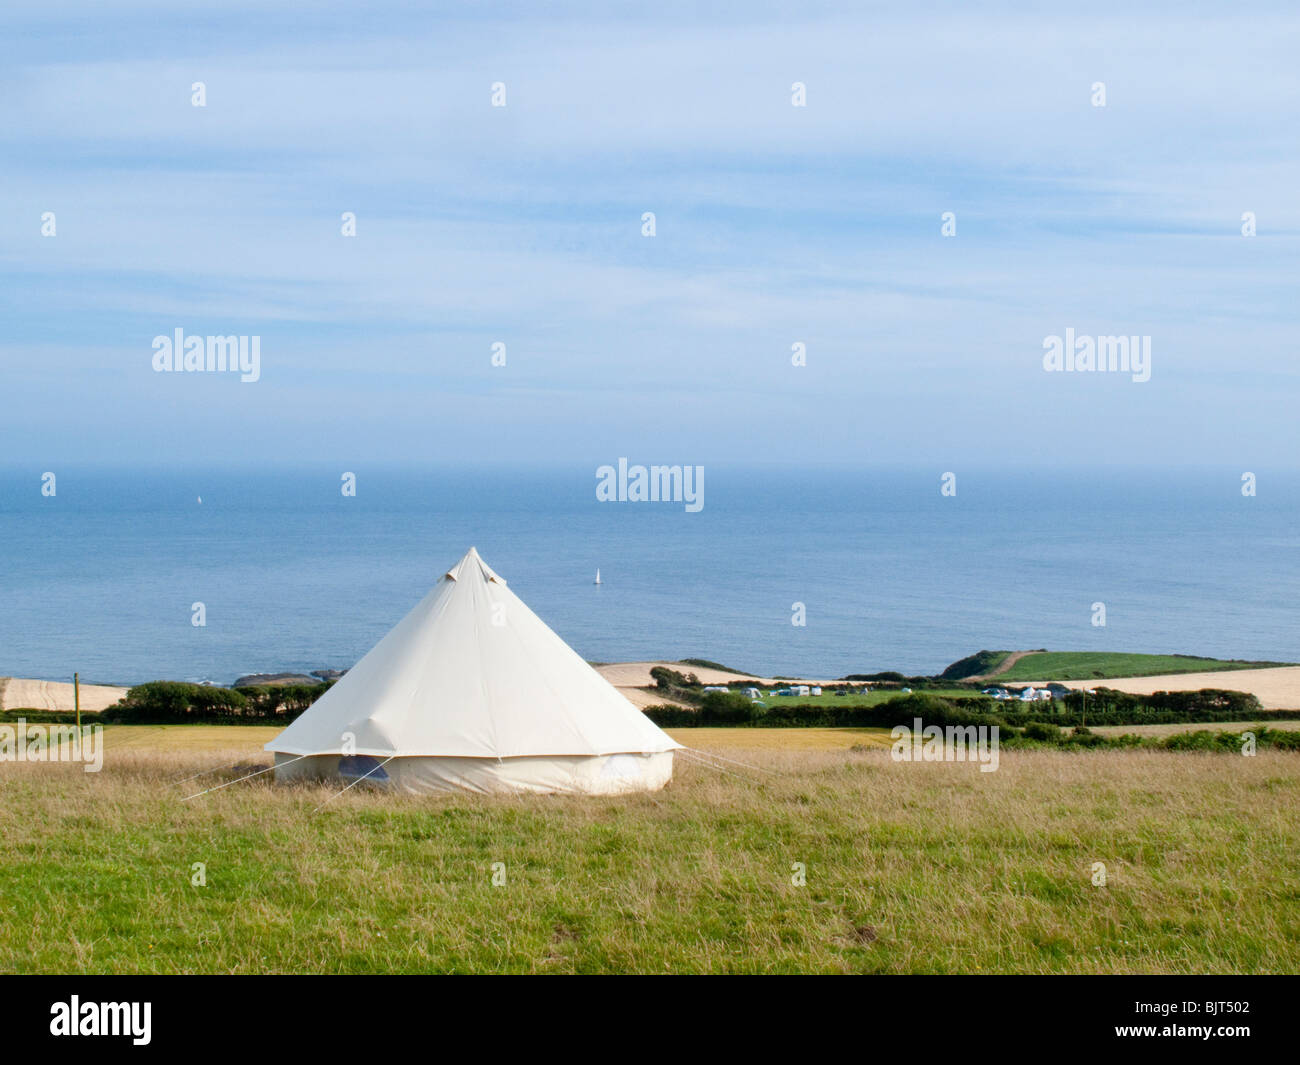 Camping with yurt tent near the sea in South Devon, UK. Stock Photo